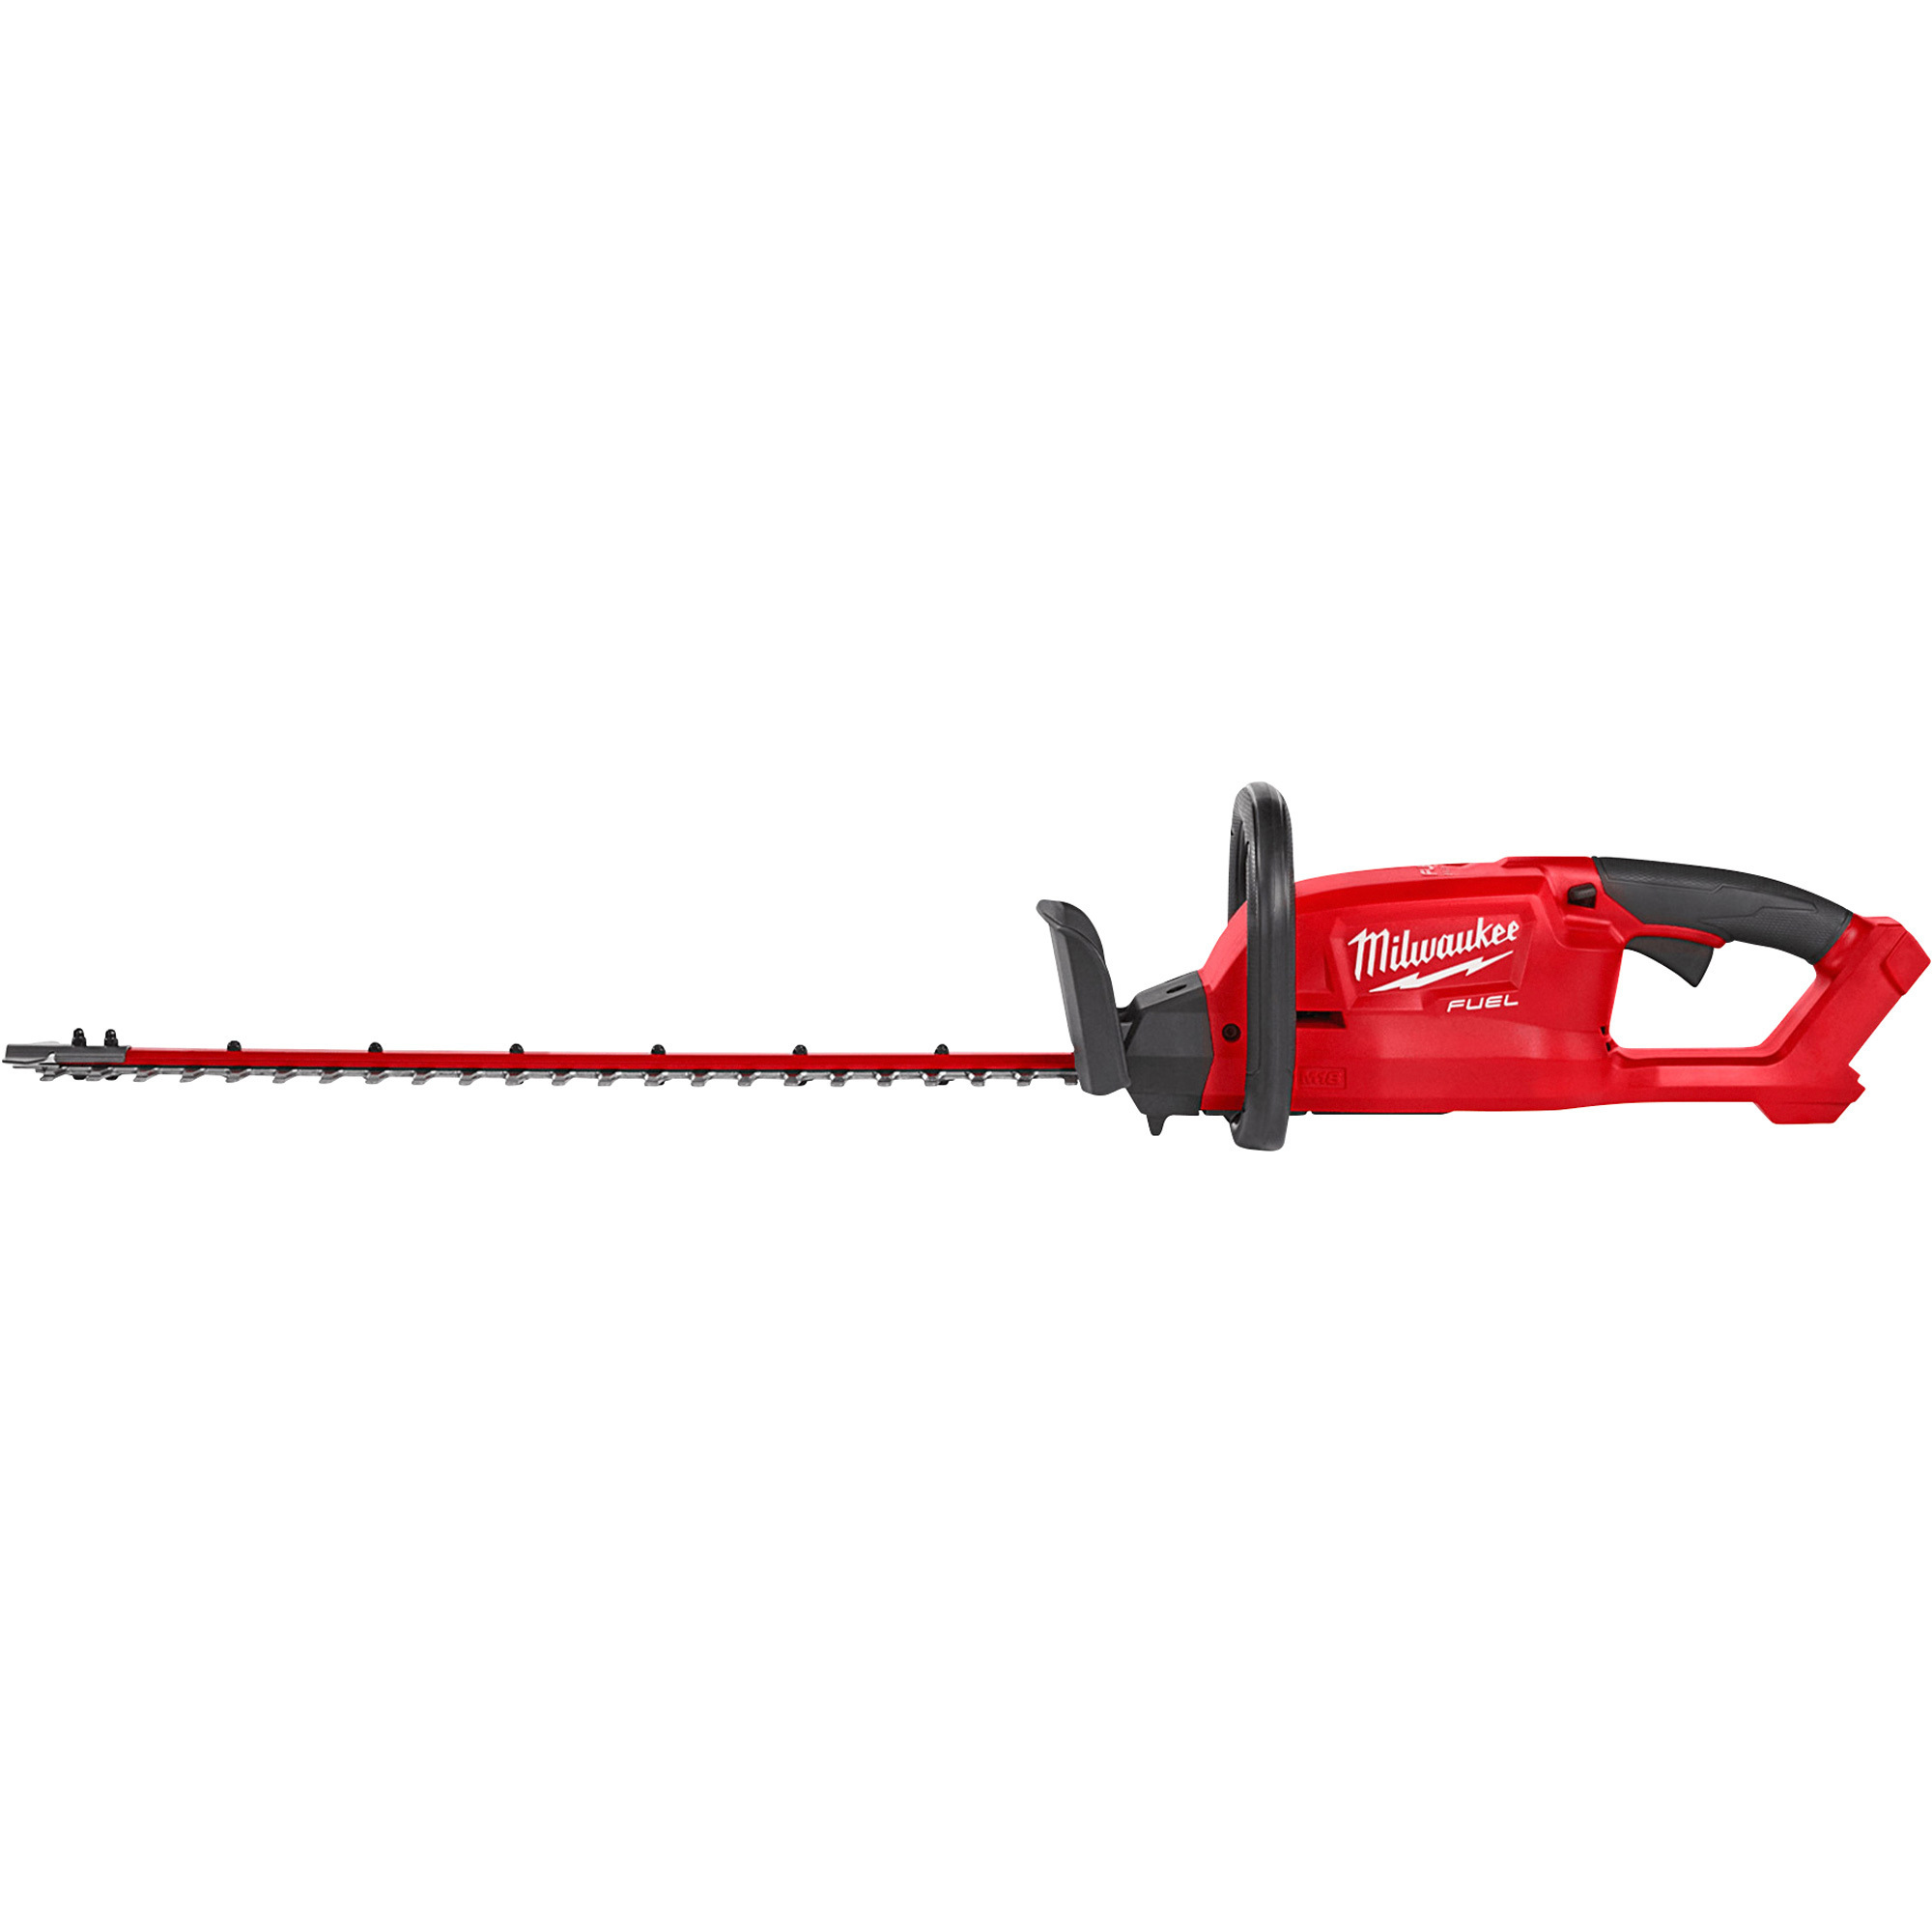 M18 FUEL Cordless Hedge Trimmer — 18V Lithium-Ion, Tool Only, Model - Milwaukee 2726-20